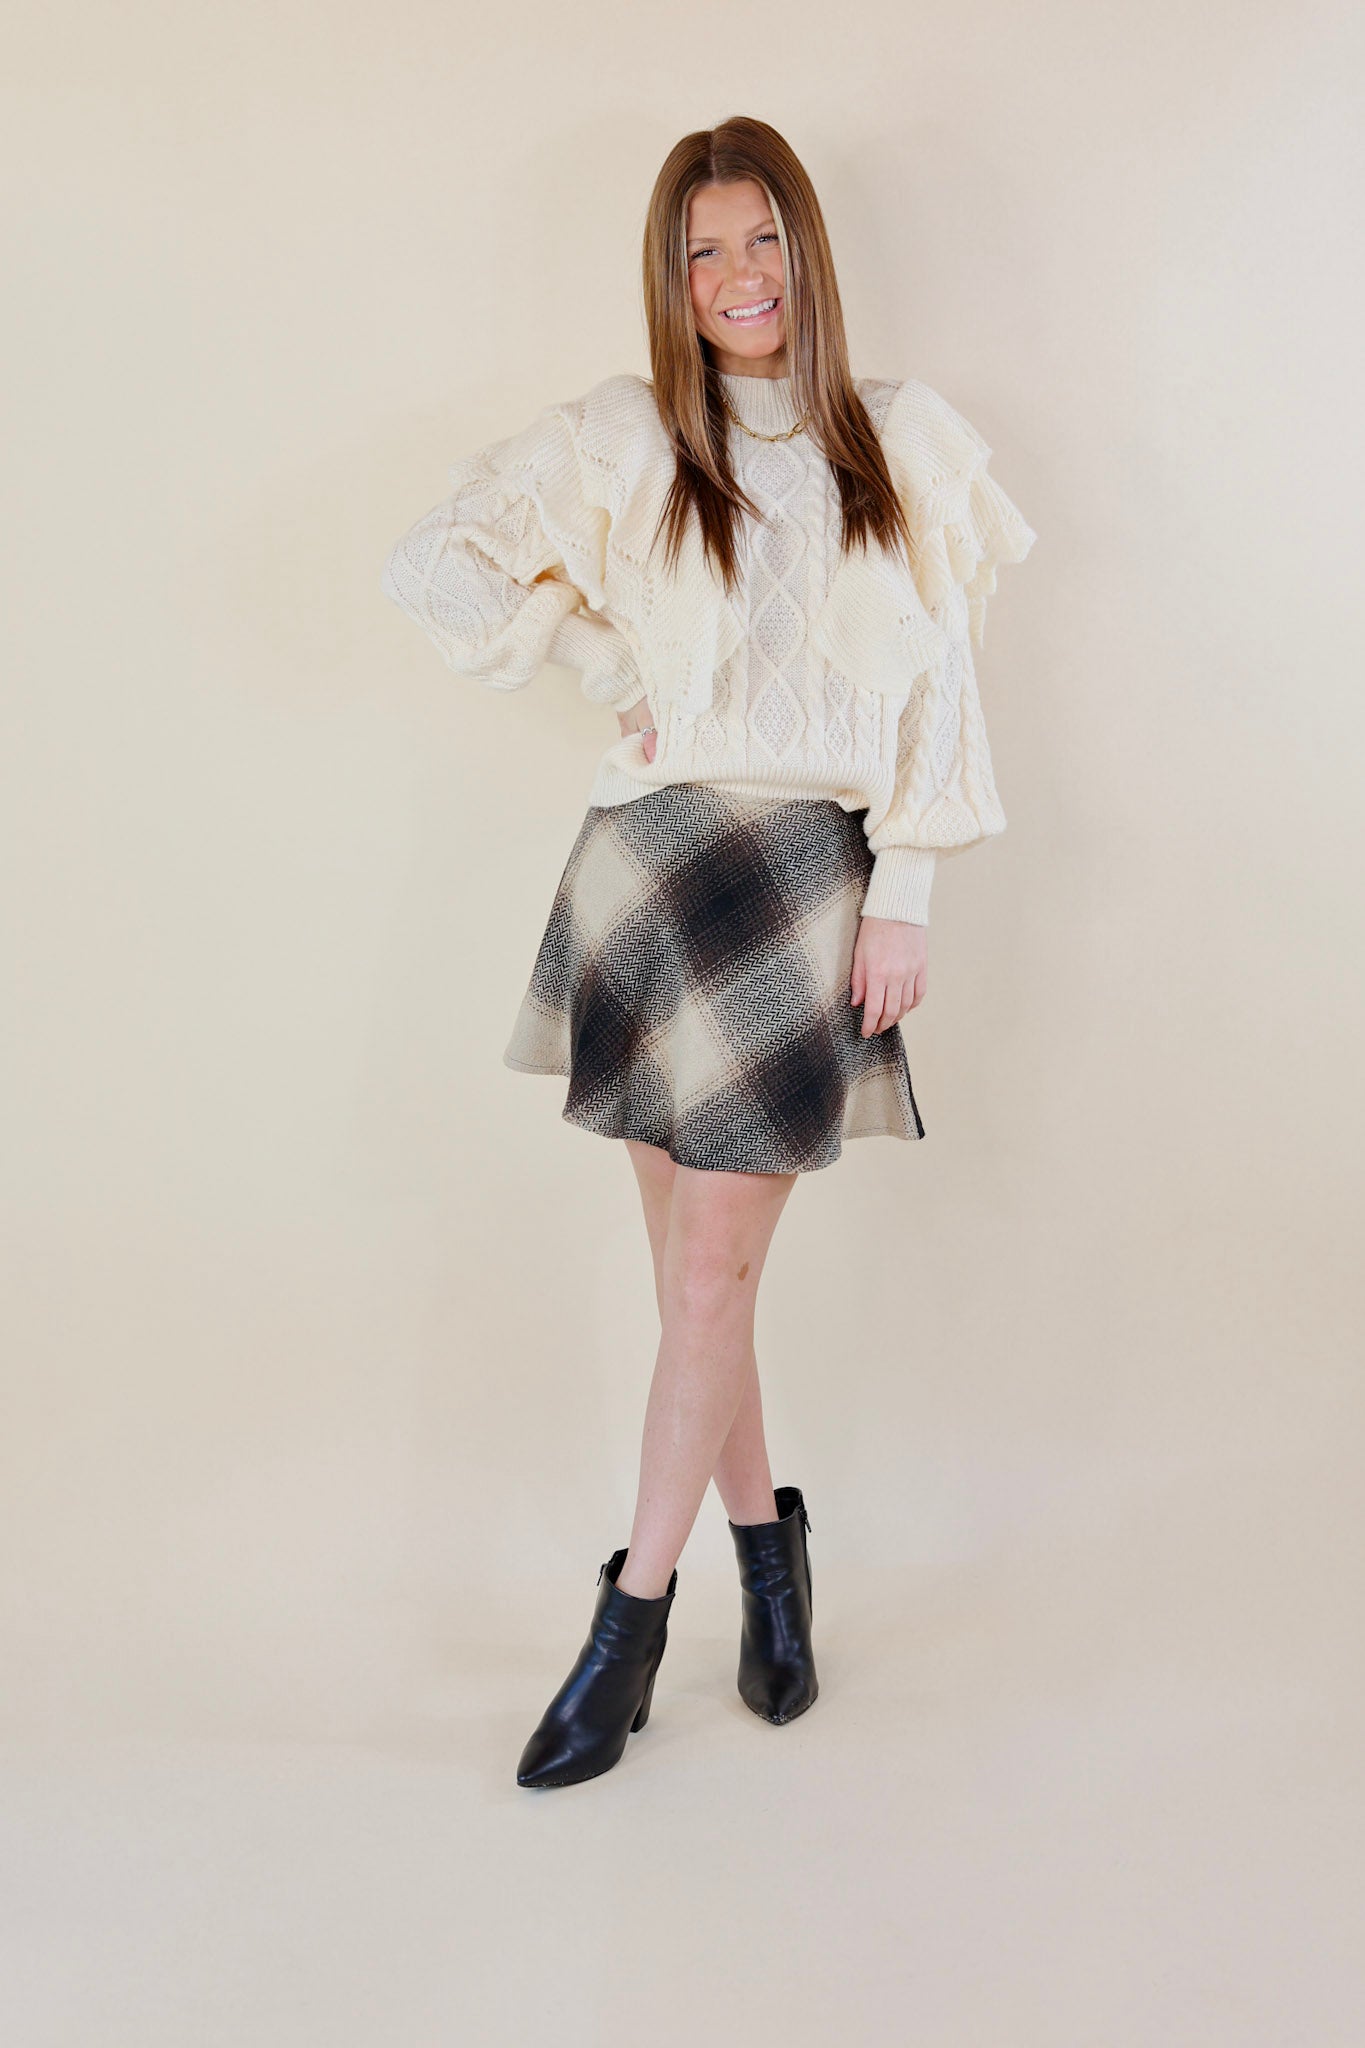 Fireside Talks Plaid Skirt in Black Mix - Giddy Up Glamour Boutique